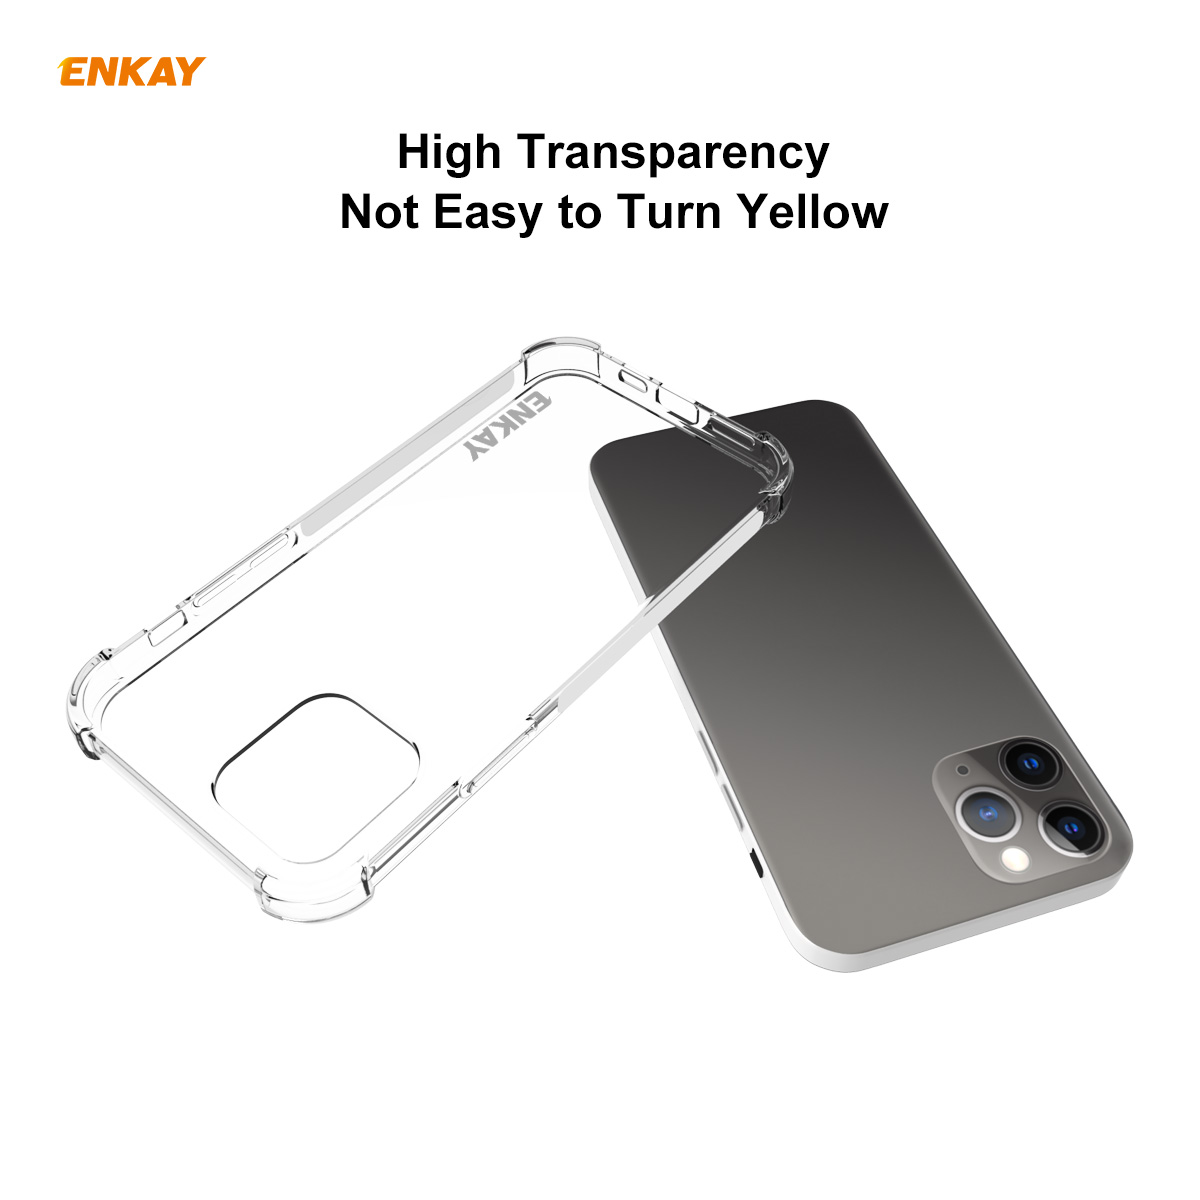 Enkay-2-in-1-for-iPhone-12-Pro-Max-Accessories-with-Airbags-Non-Yellow-Transparent-TPU-Protective-Ca-1769387-6